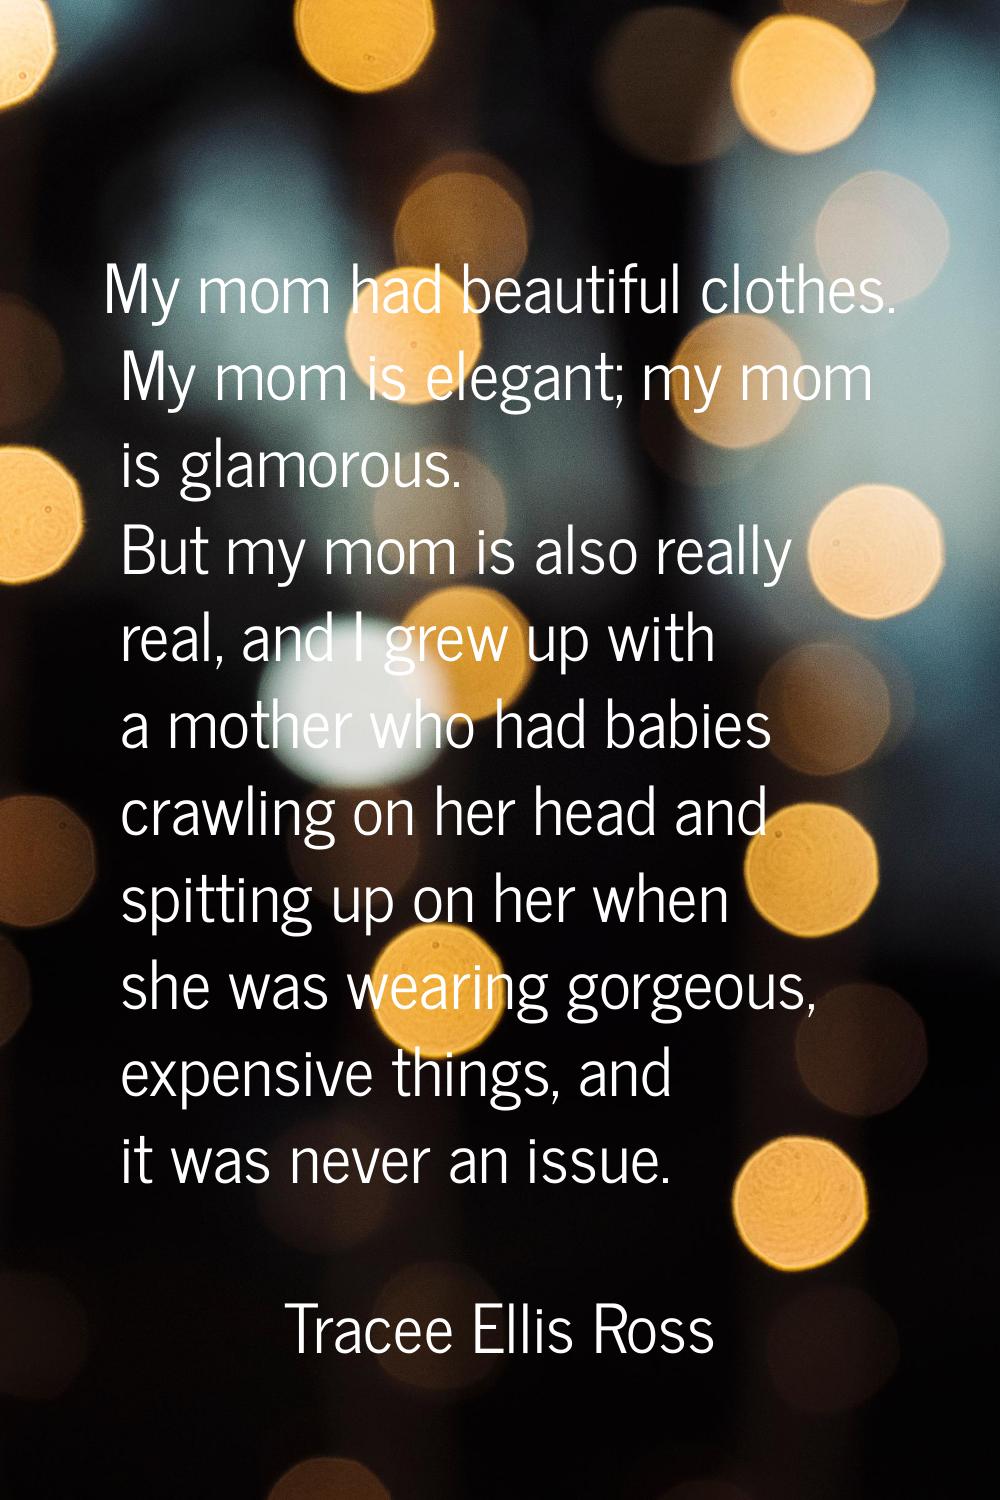 My mom had beautiful clothes. My mom is elegant; my mom is glamorous. But my mom is also really rea